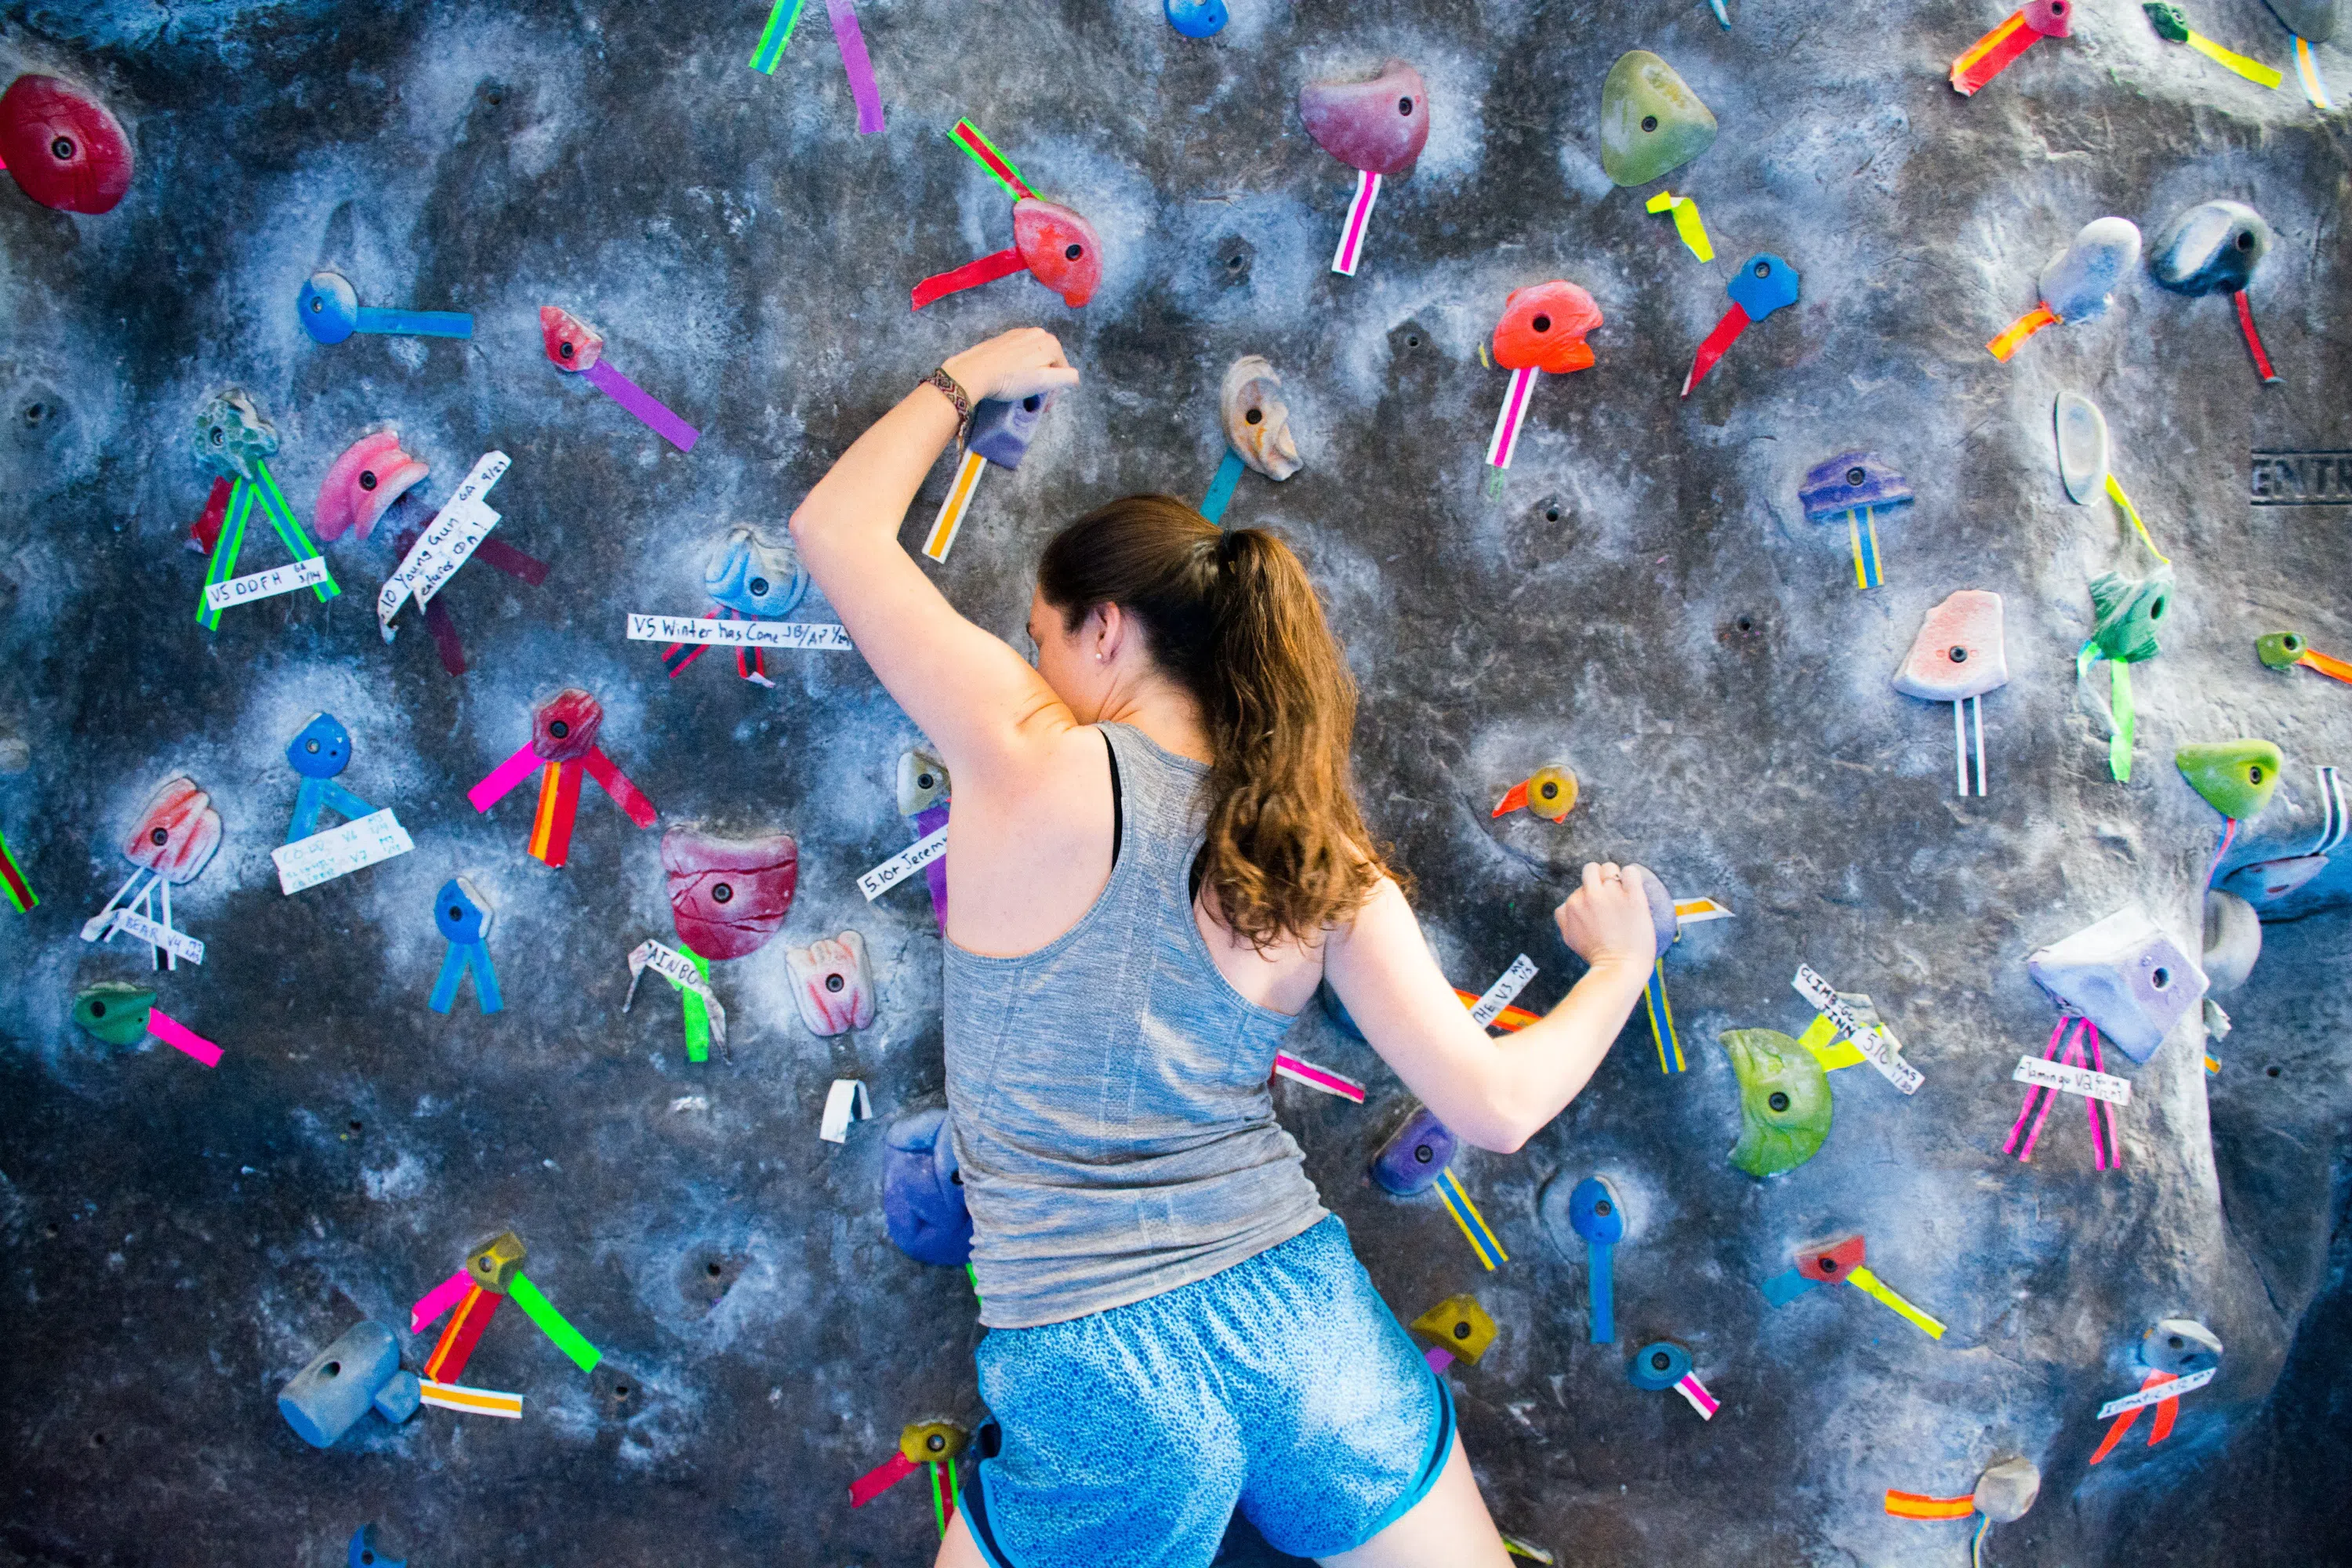 Pottruck Health and Fitness Center, Climbing Wall 